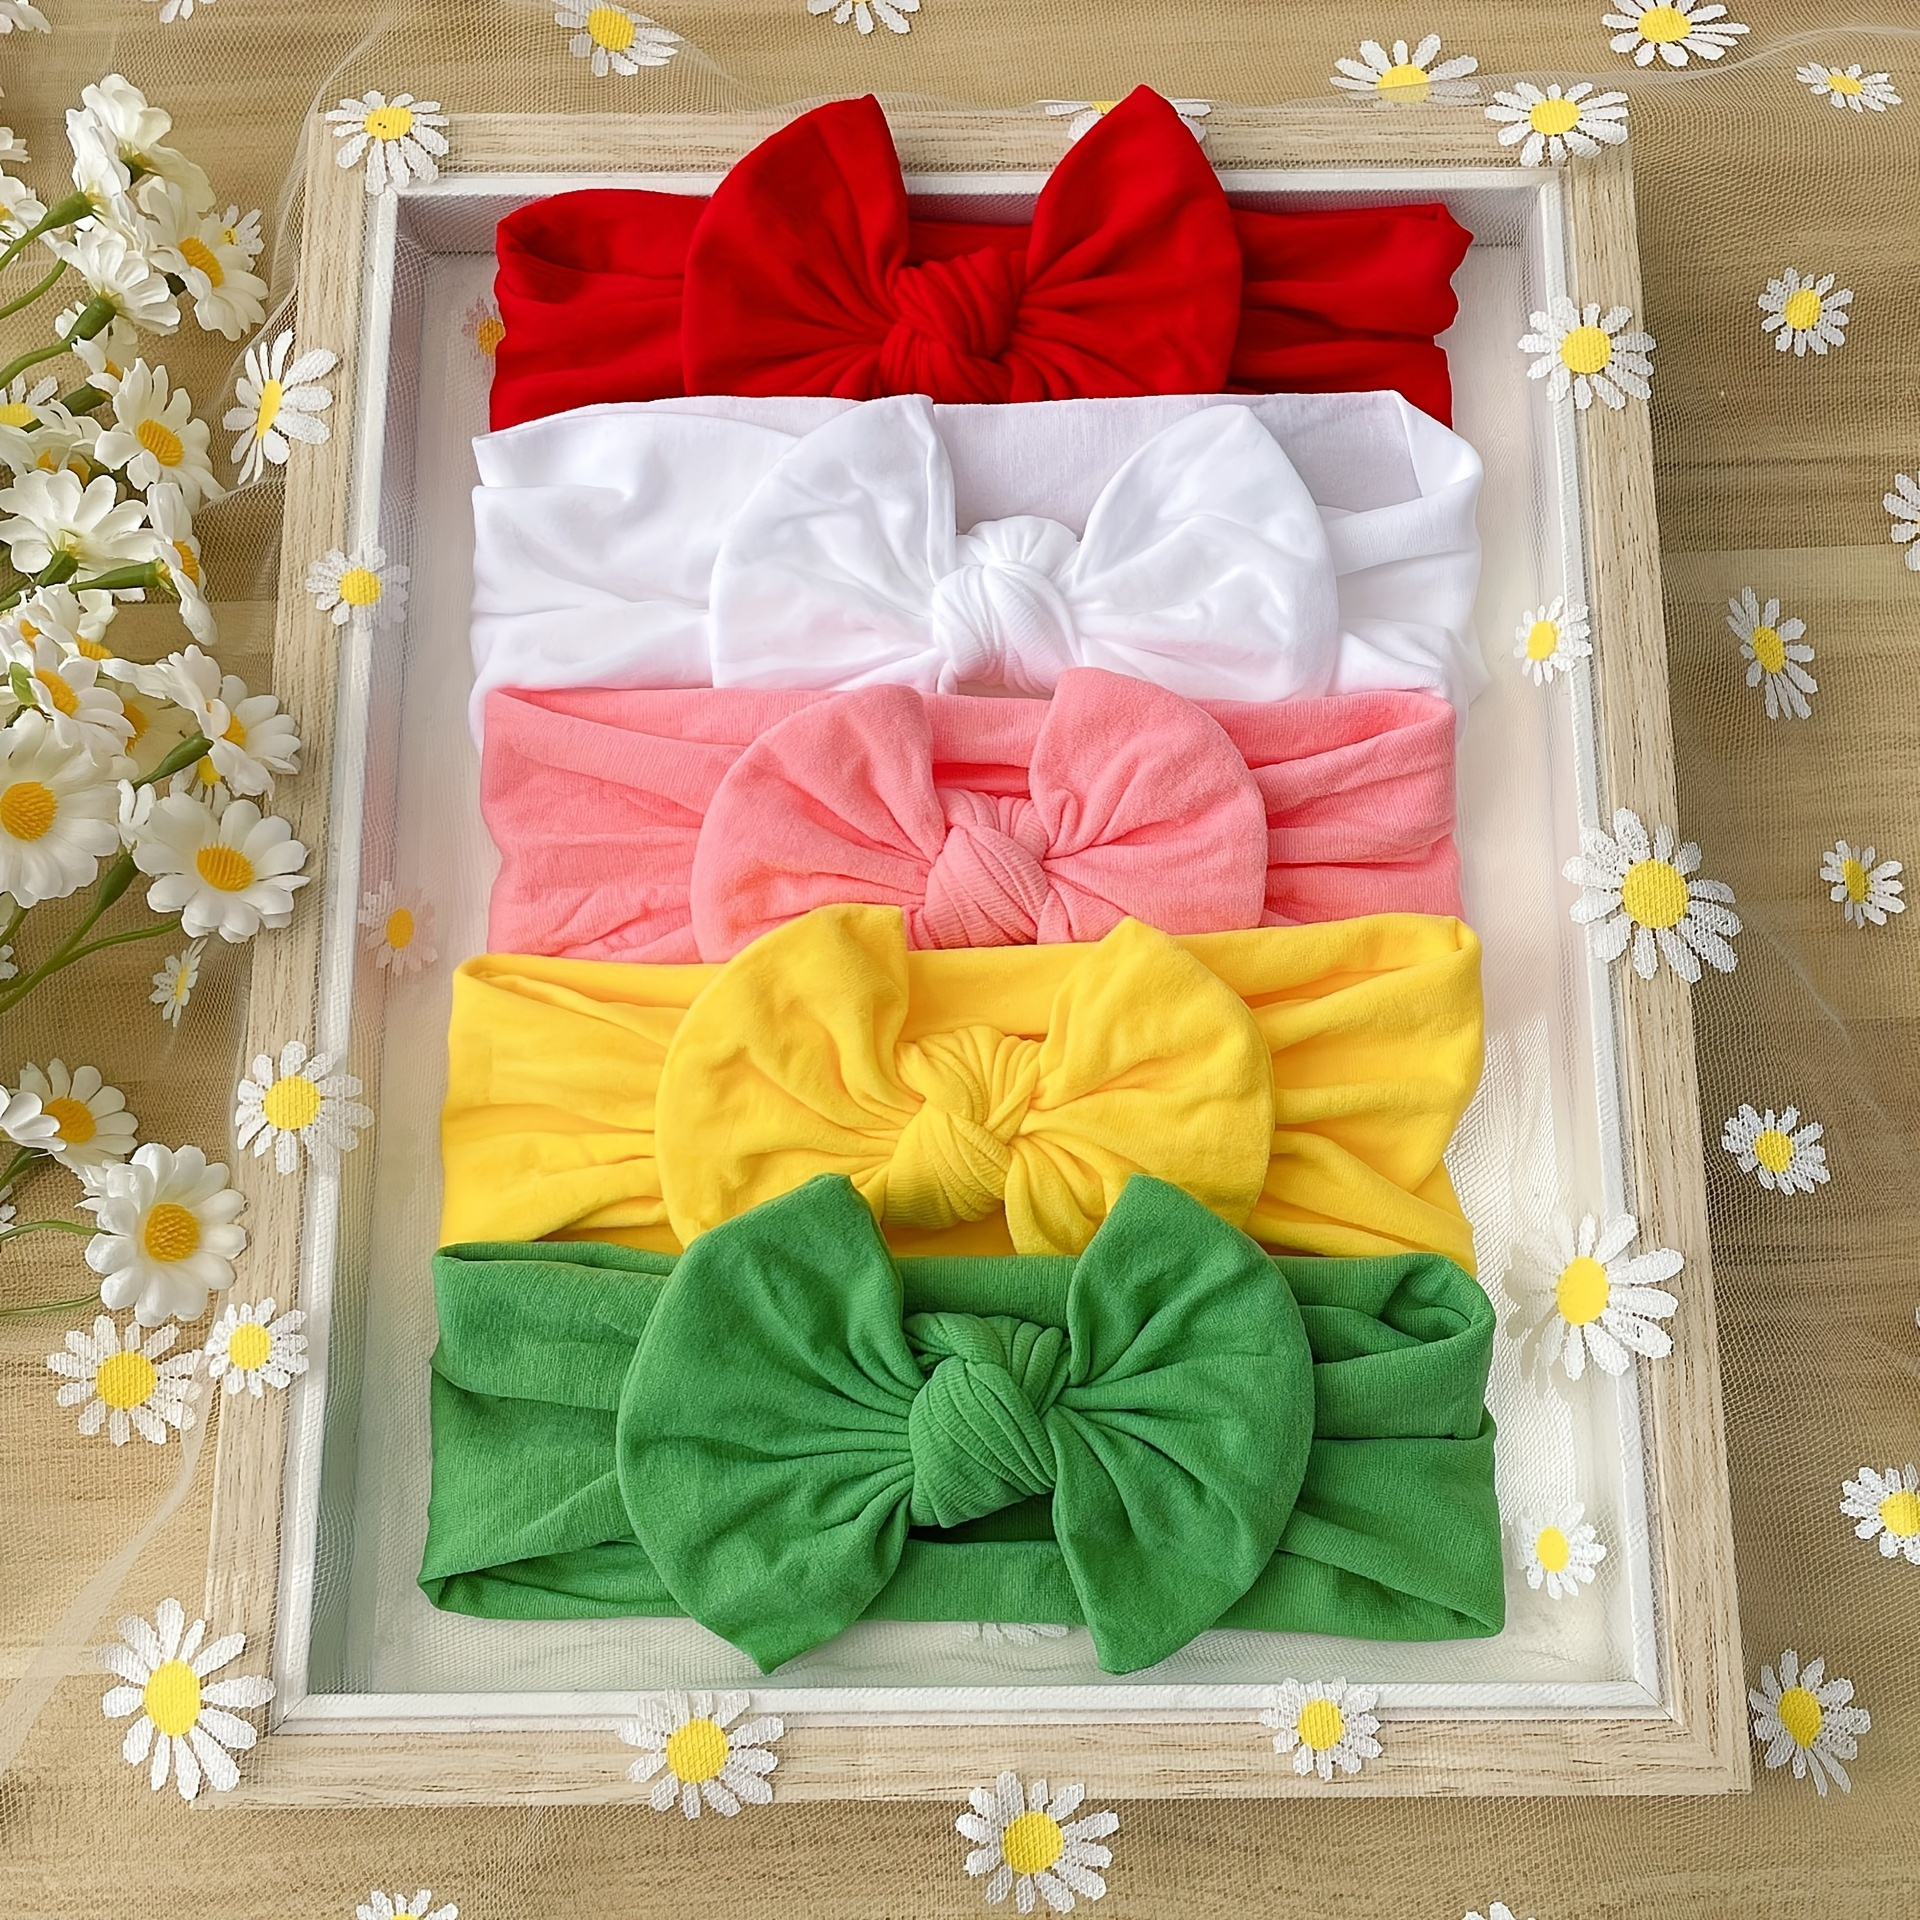 

5pcs New Soft Elastic Hairband Red White Yellow Green Headwear Cute Bowknot Decorative Hair Accessories, Ideal Choice For Gifts